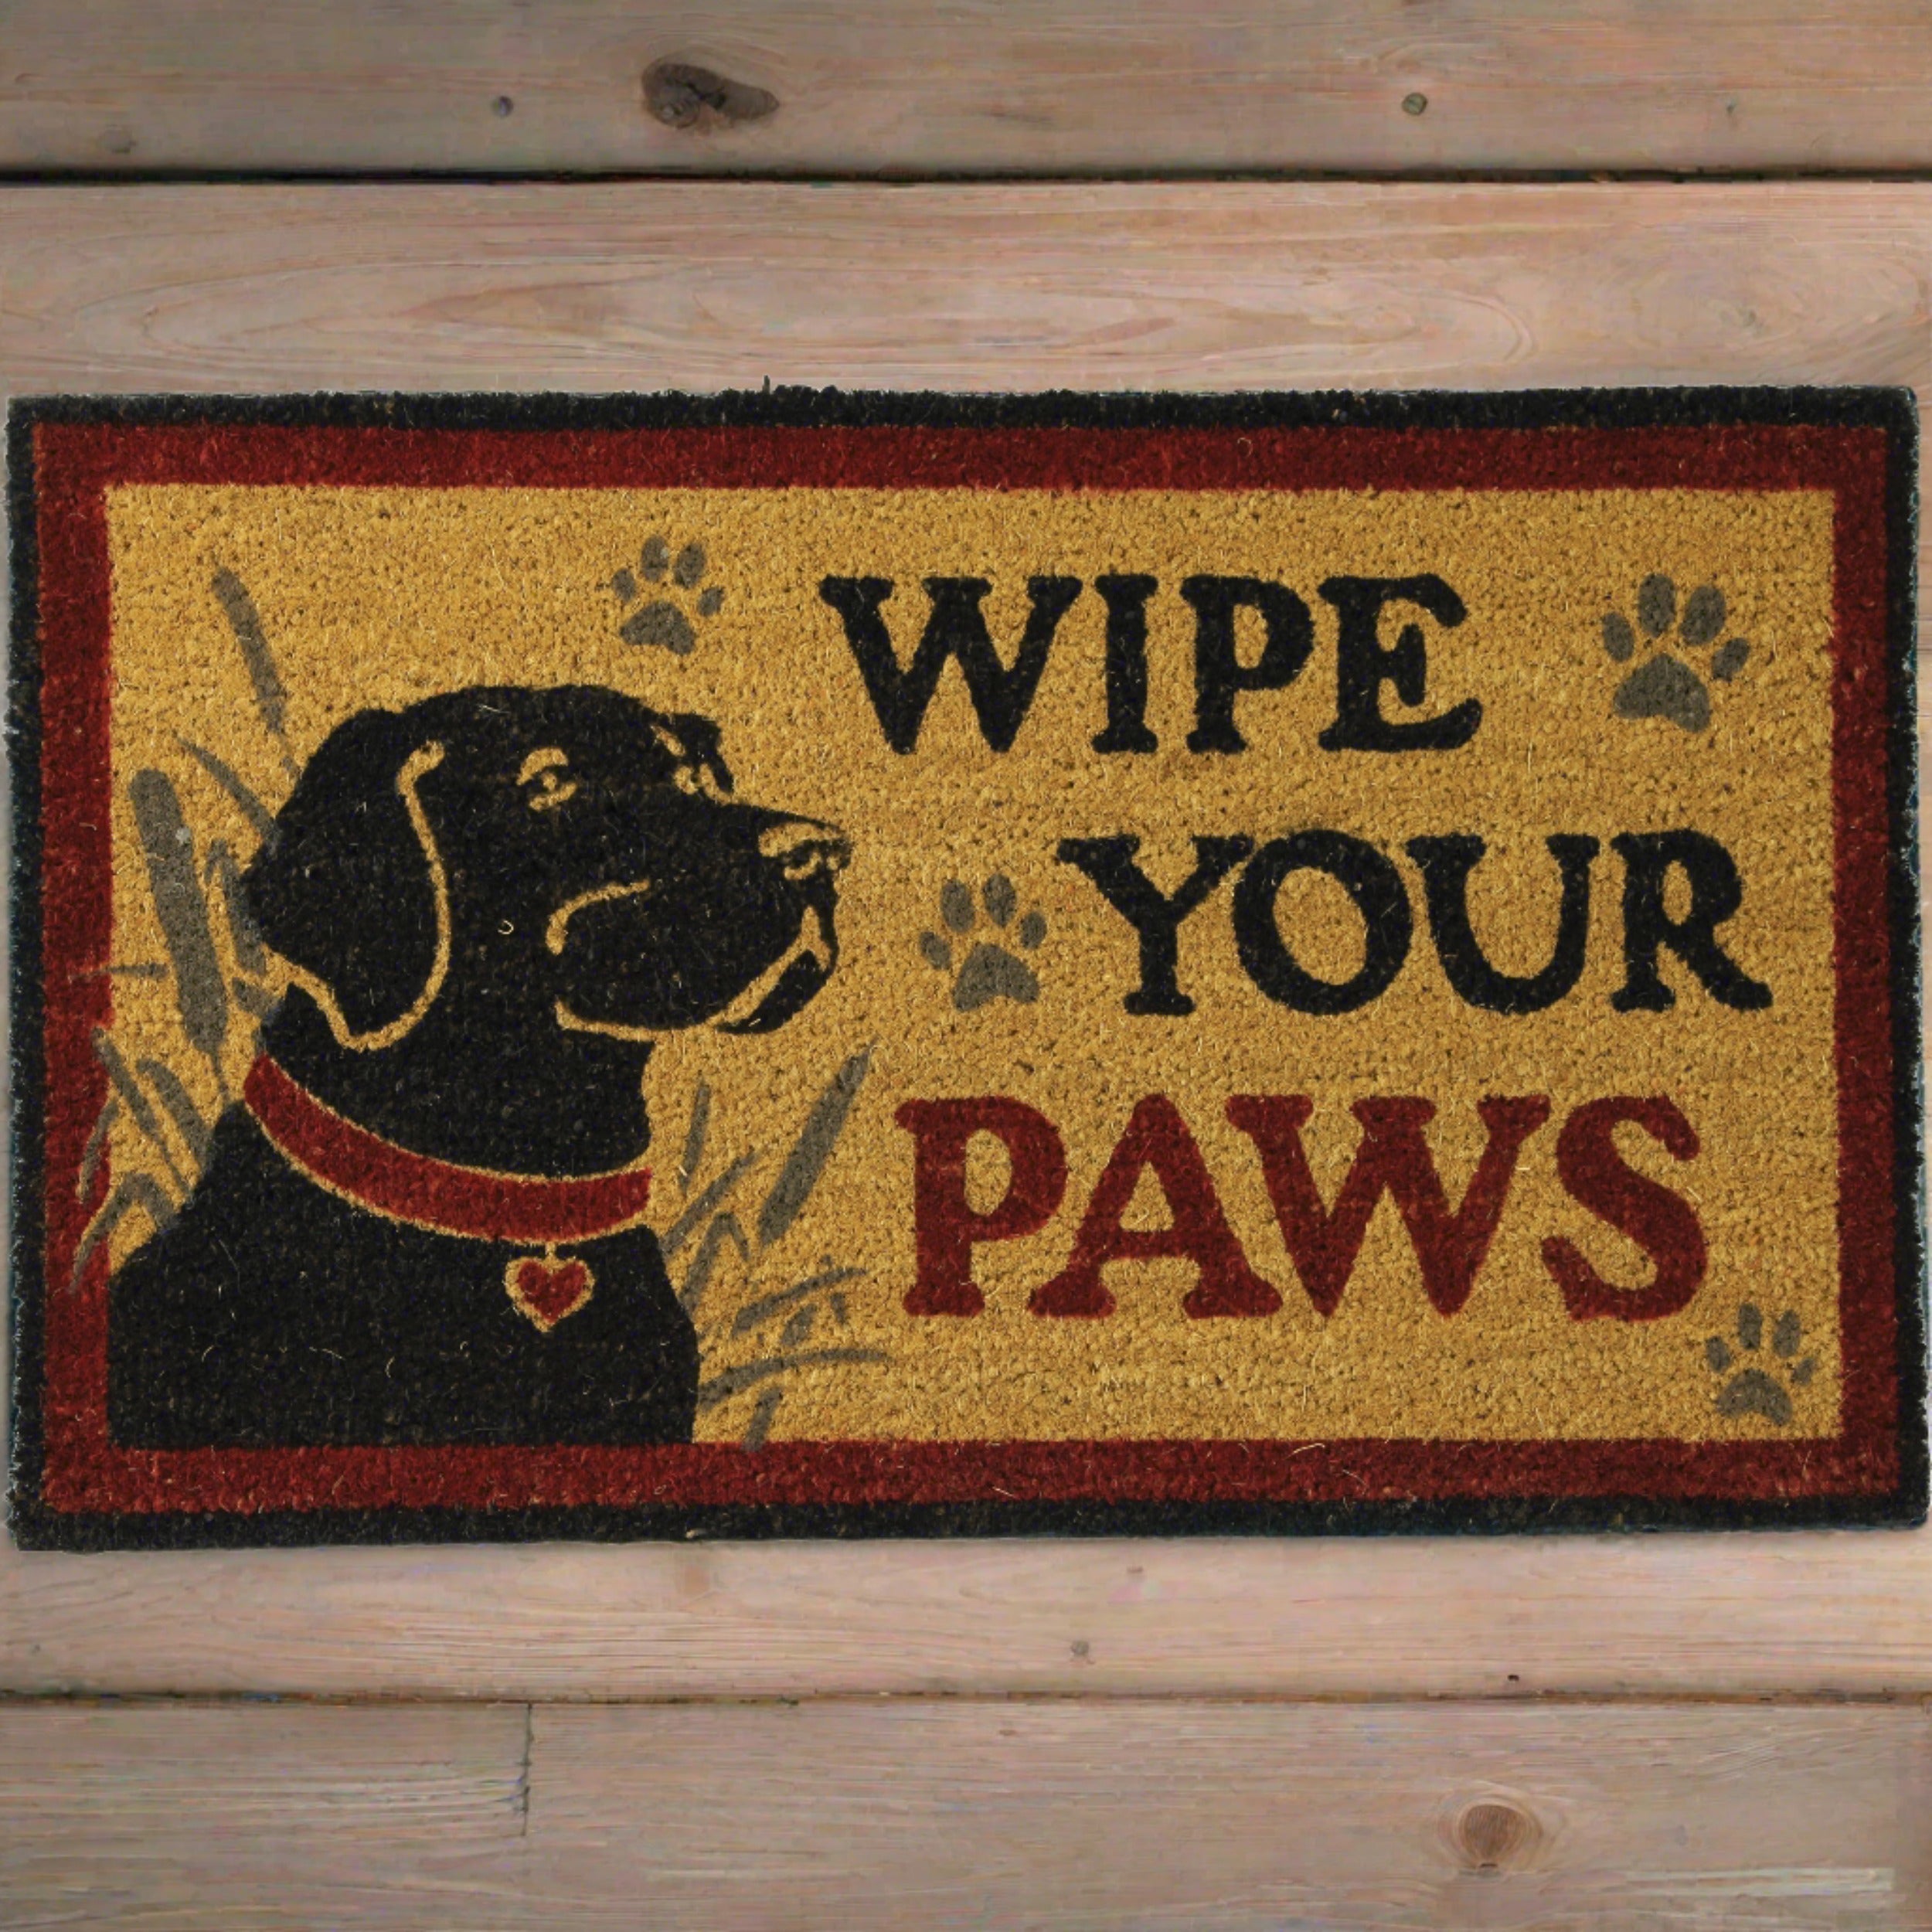 PetLab Grubby Paw Doormat - Traps Dirt Instantly